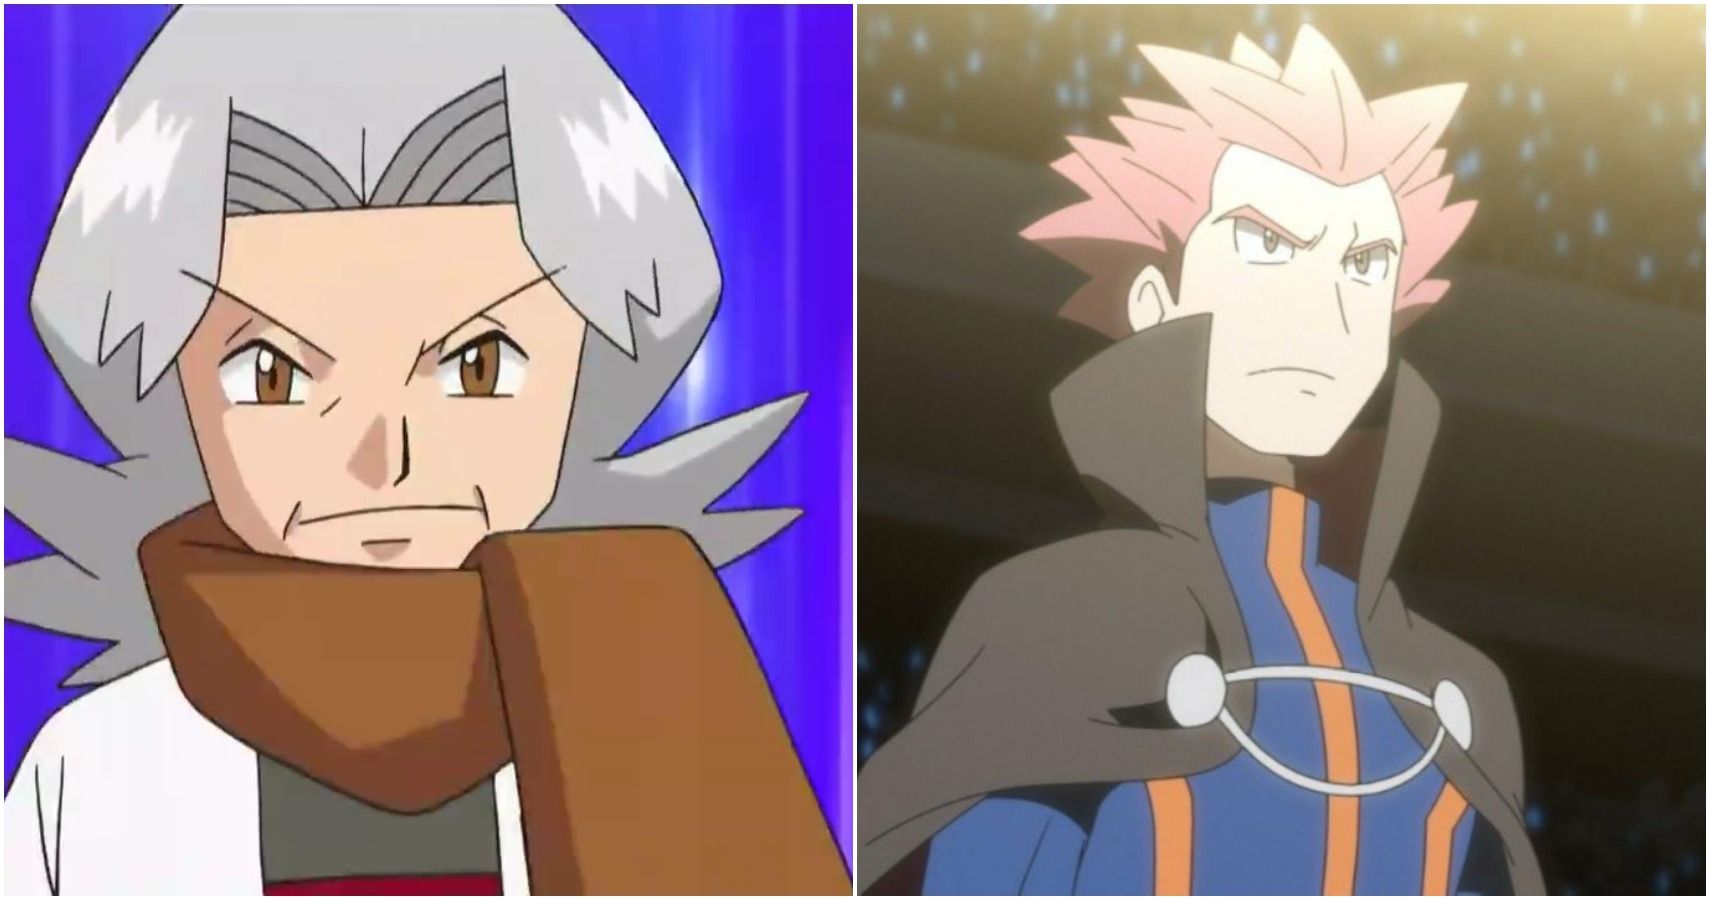 10 most powerful trainers in Pokemon ranked